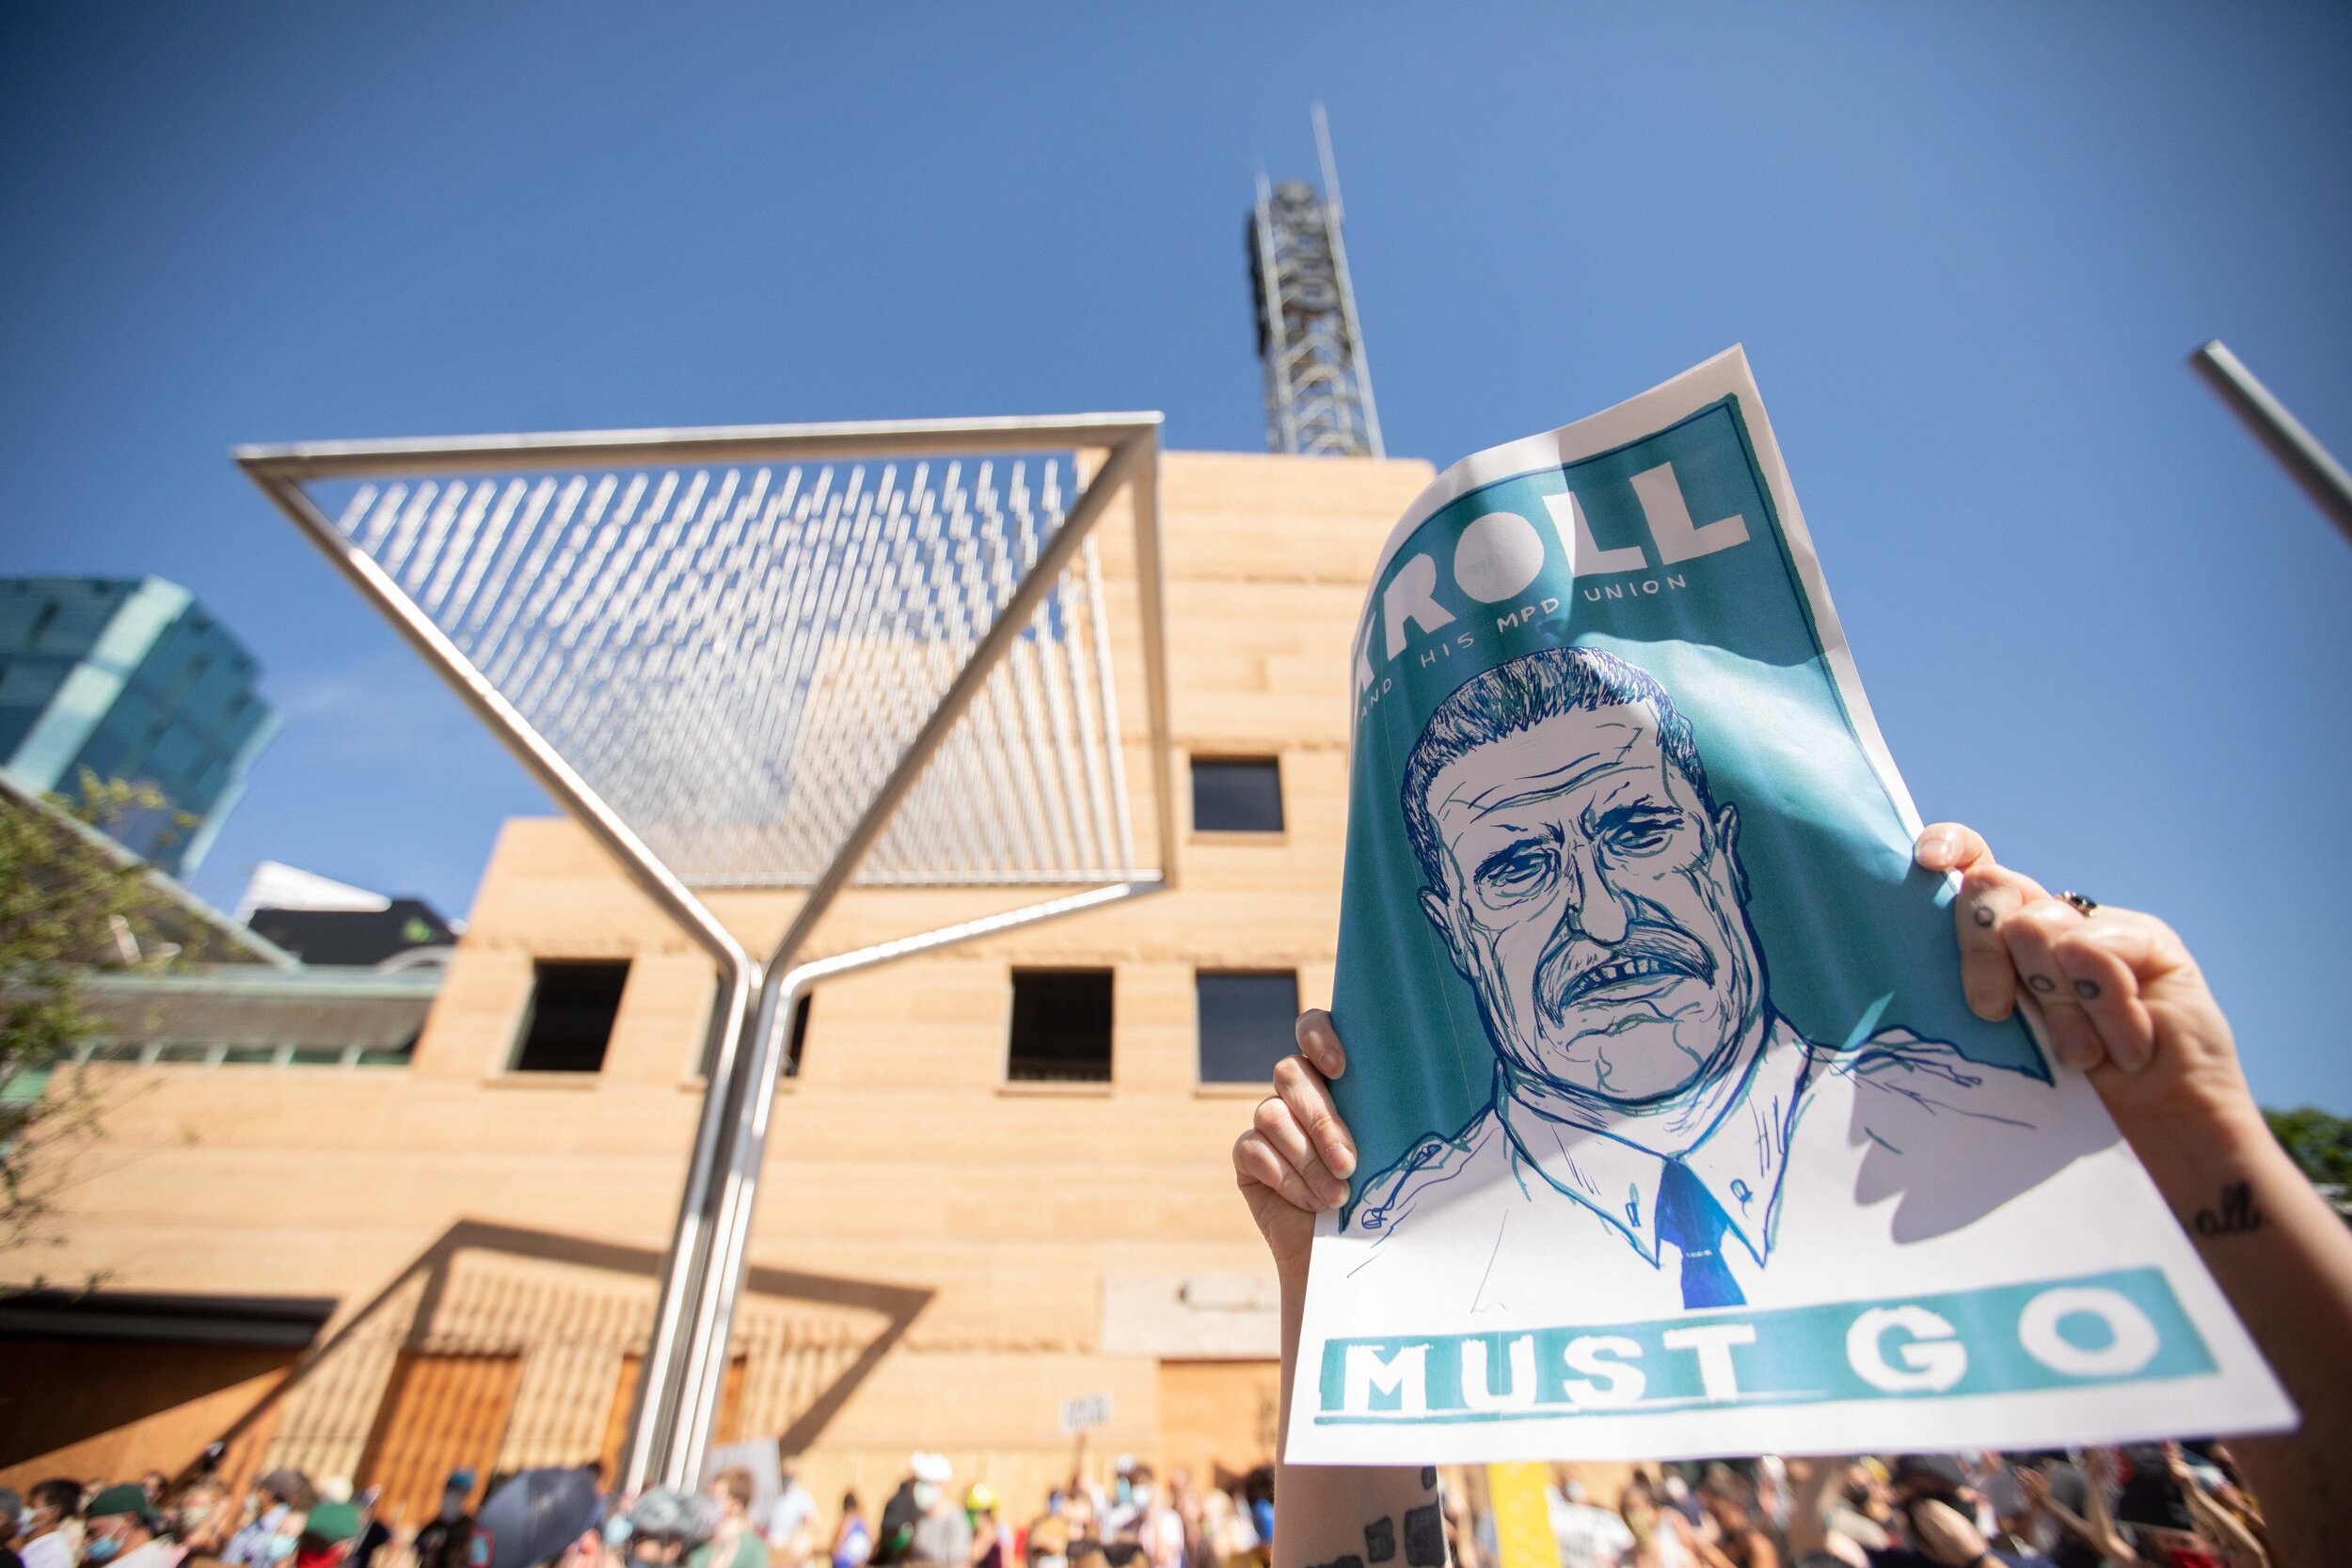  A "Bob Kroll Must Go" sign is held up in front of the WCCO building in Minneapolis, Minnesota at a protest demanding that Liz Collin be fired from the station. The Television anchor is married to Bob Kroll,  the president of the Police Officers Fede